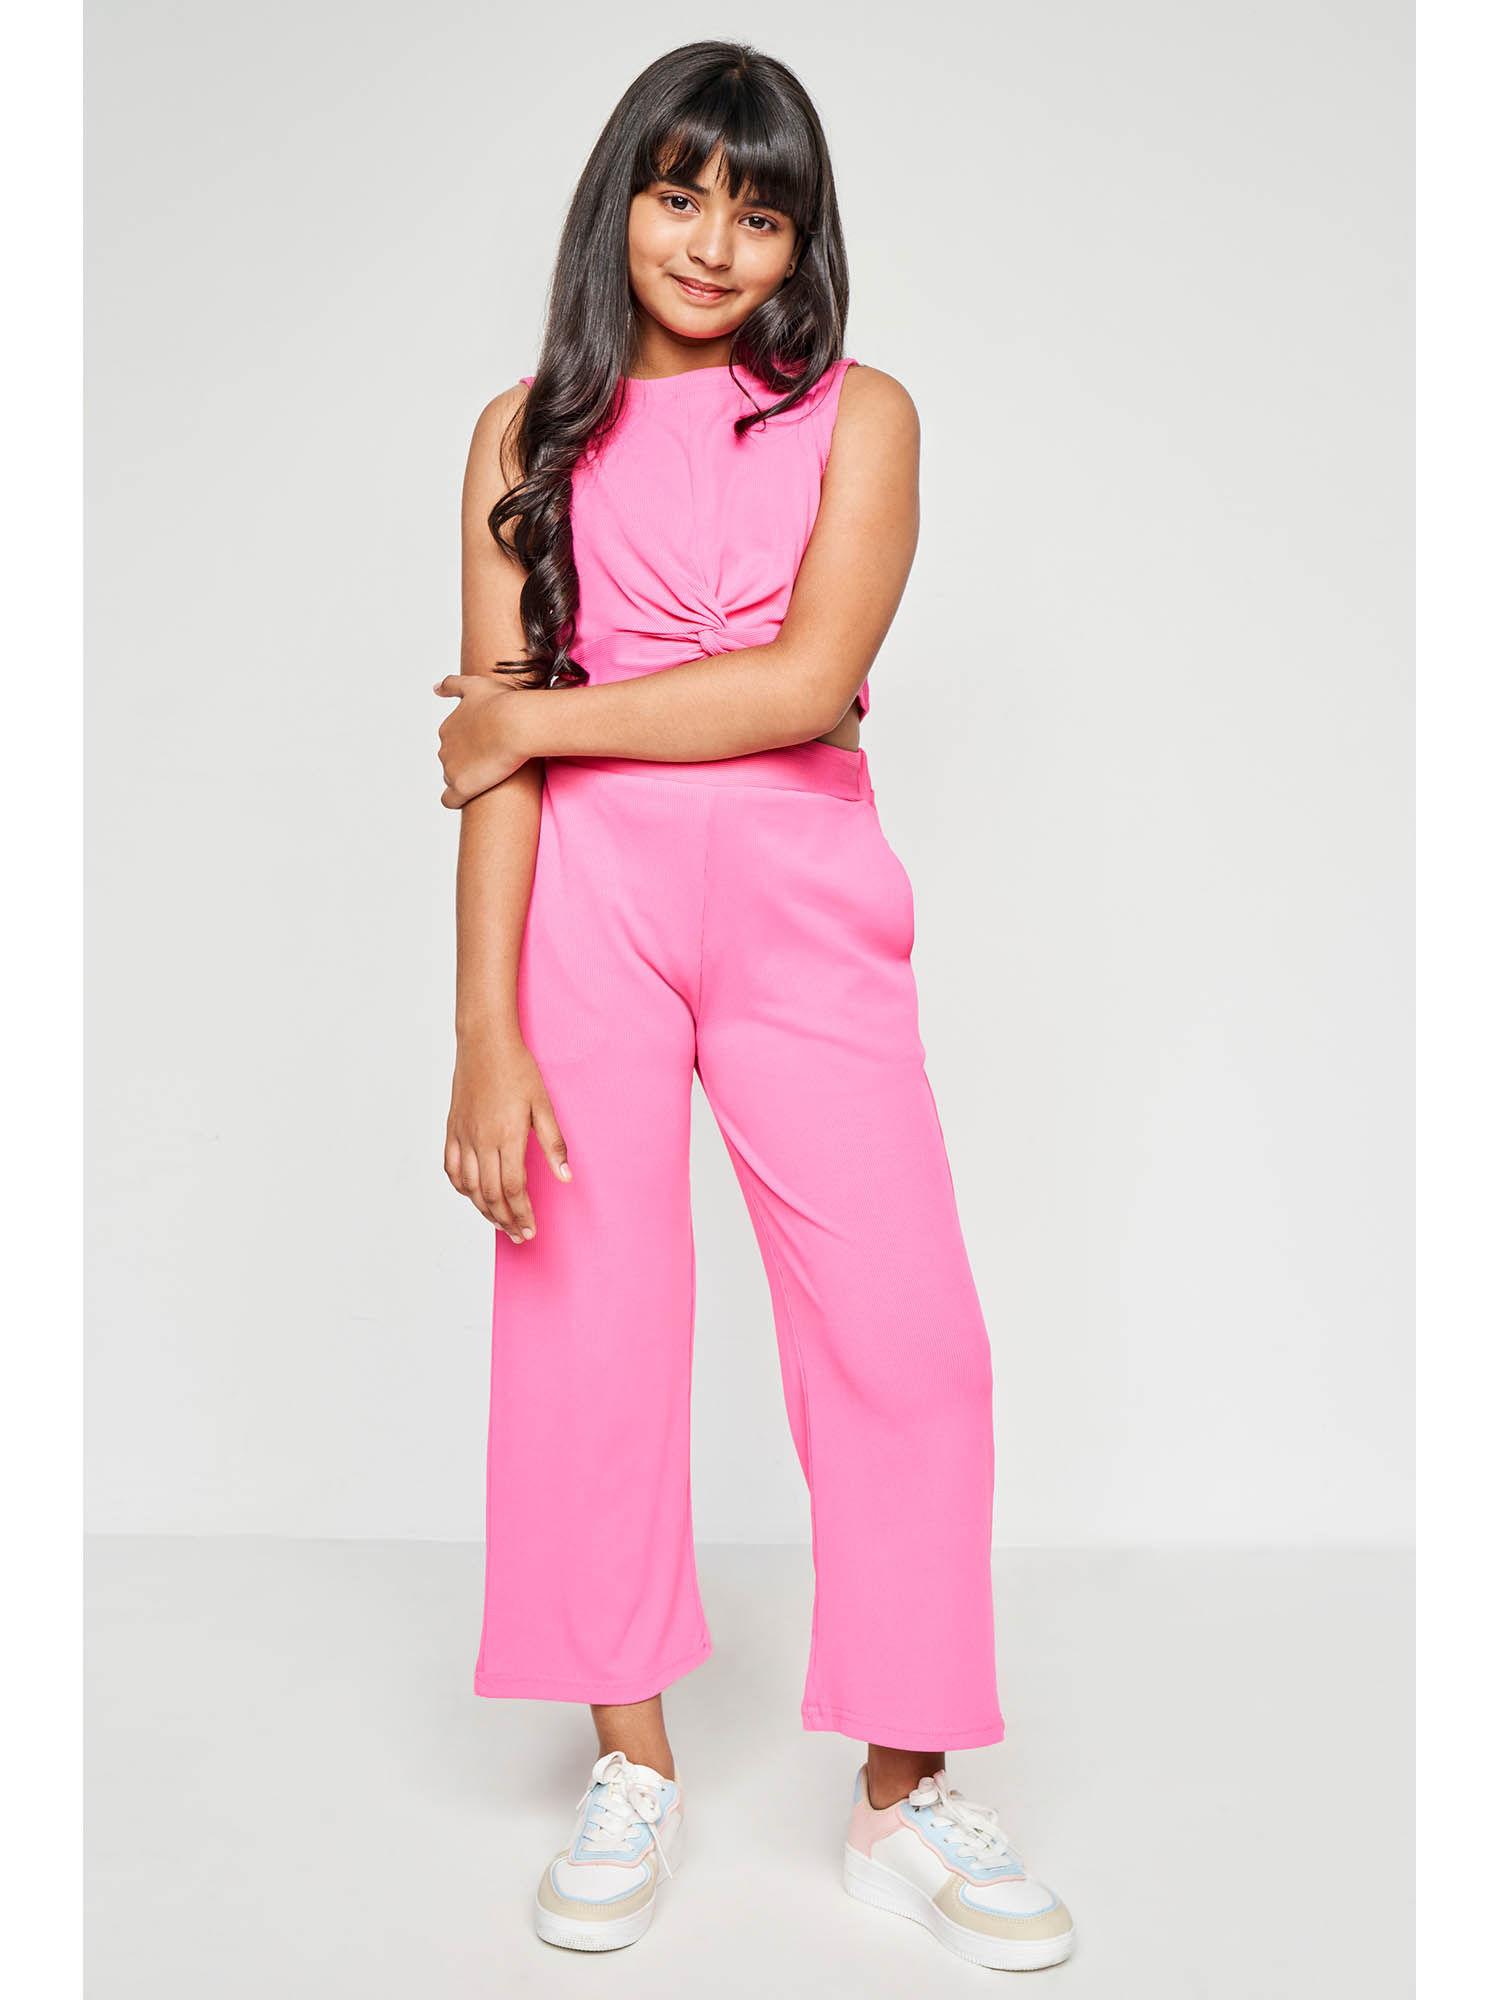 solid pink casual top and pant (set of 2)